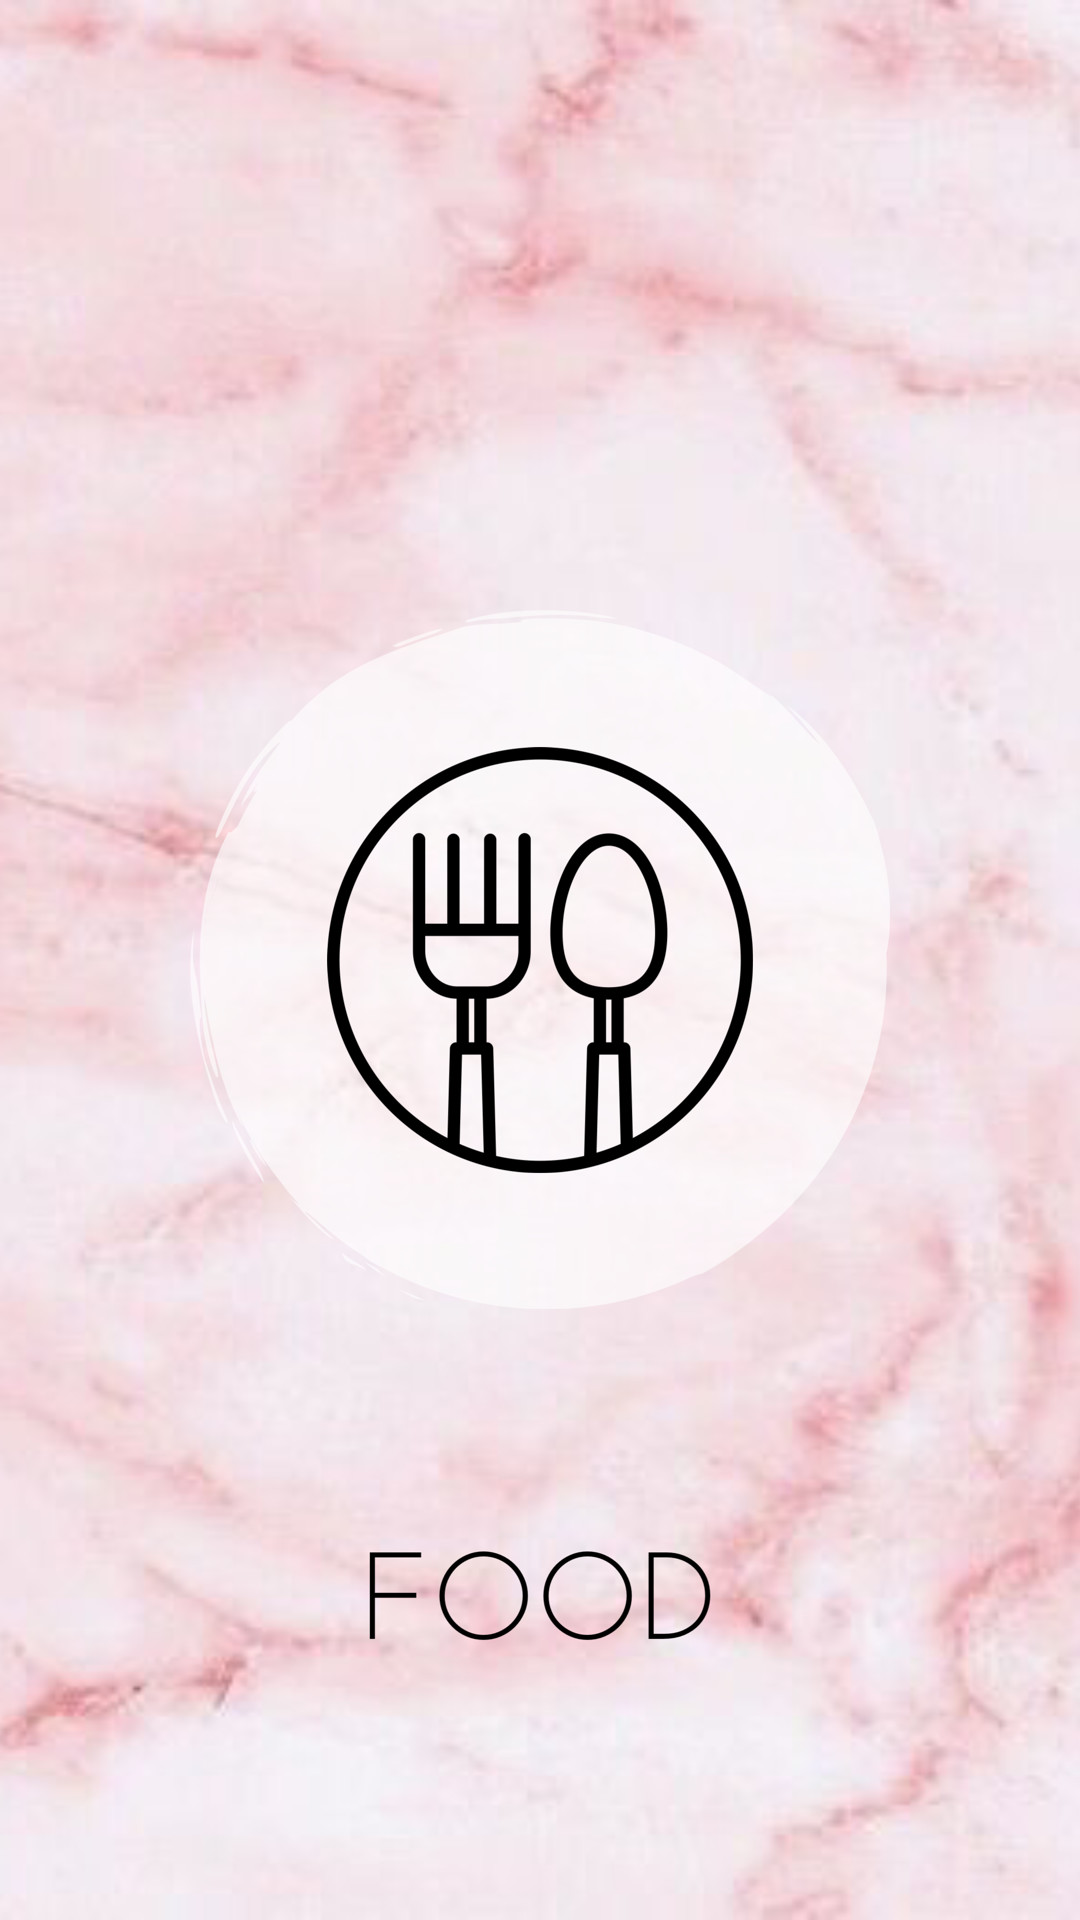 1080x1920 Highlight cover - Food Pink and Floral Theme.